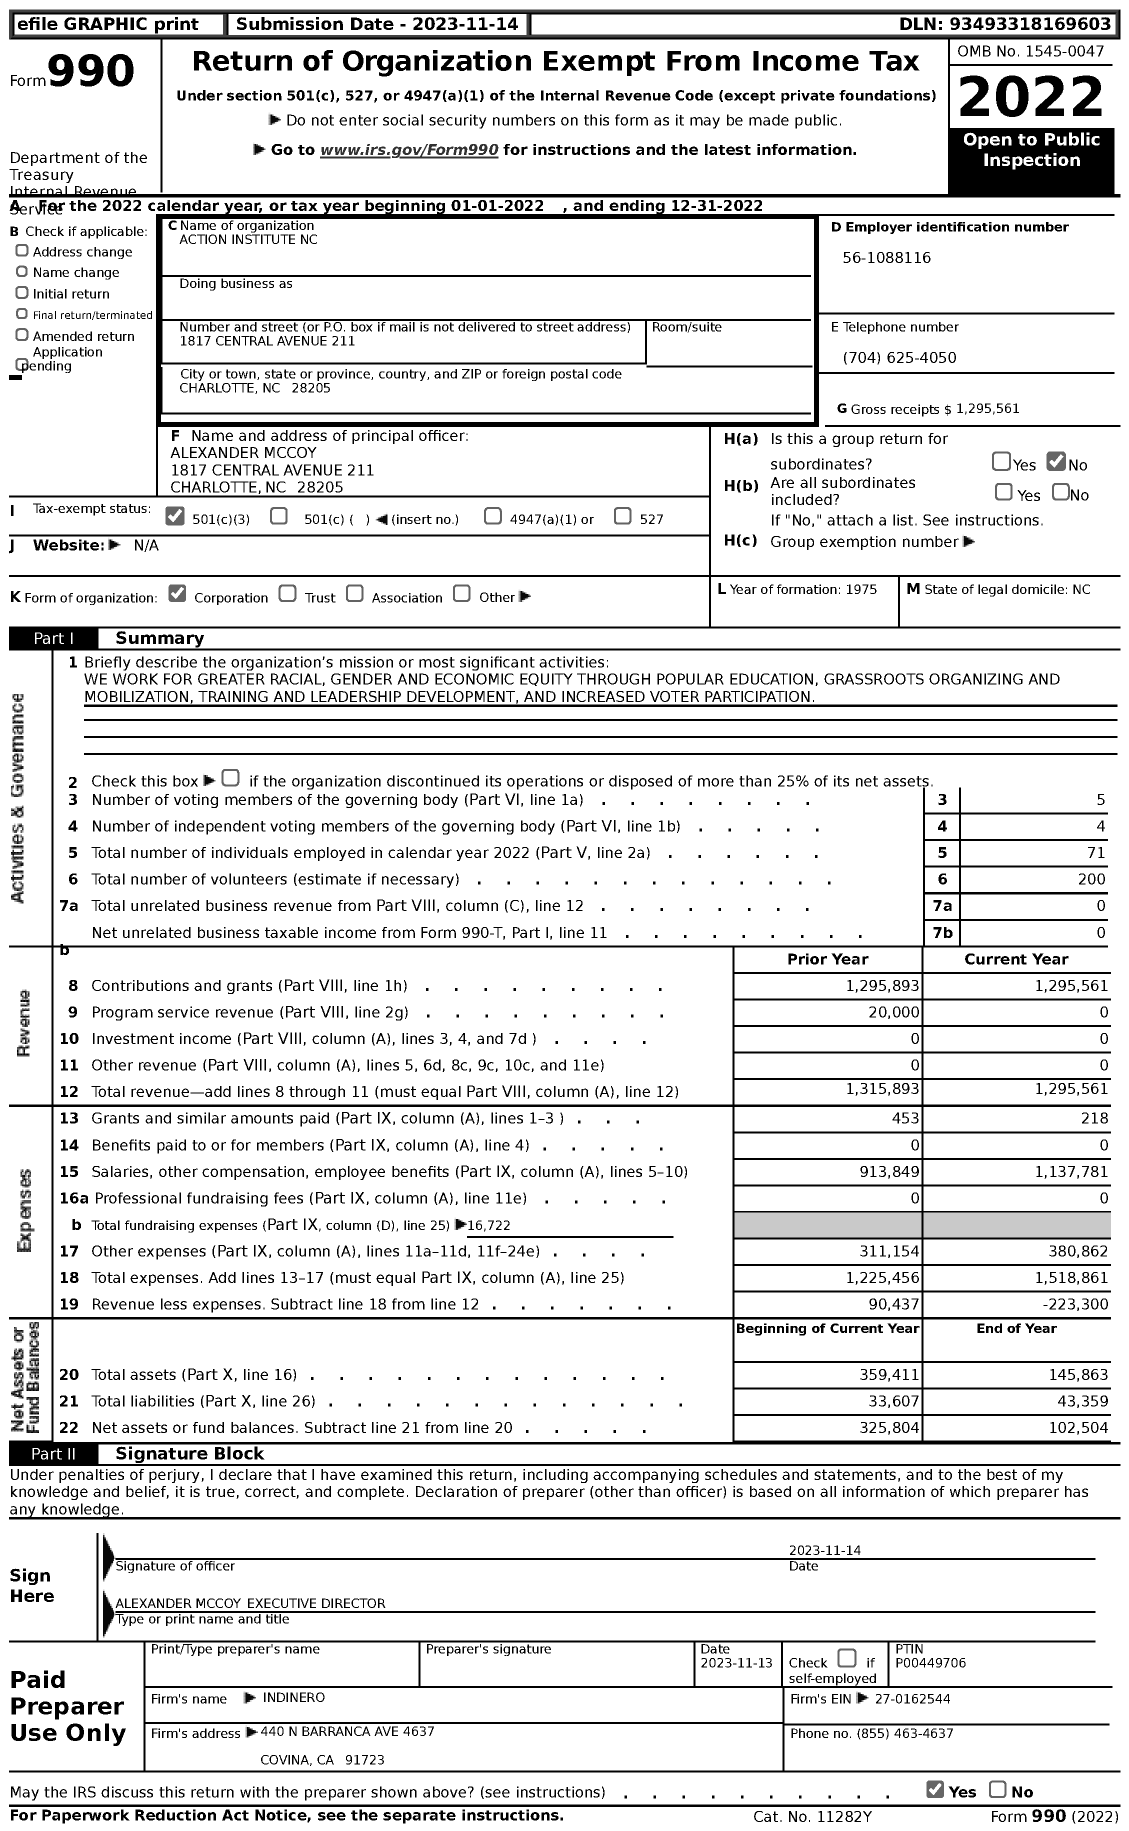 Image of first page of 2022 Form 990 for Action Institute NC